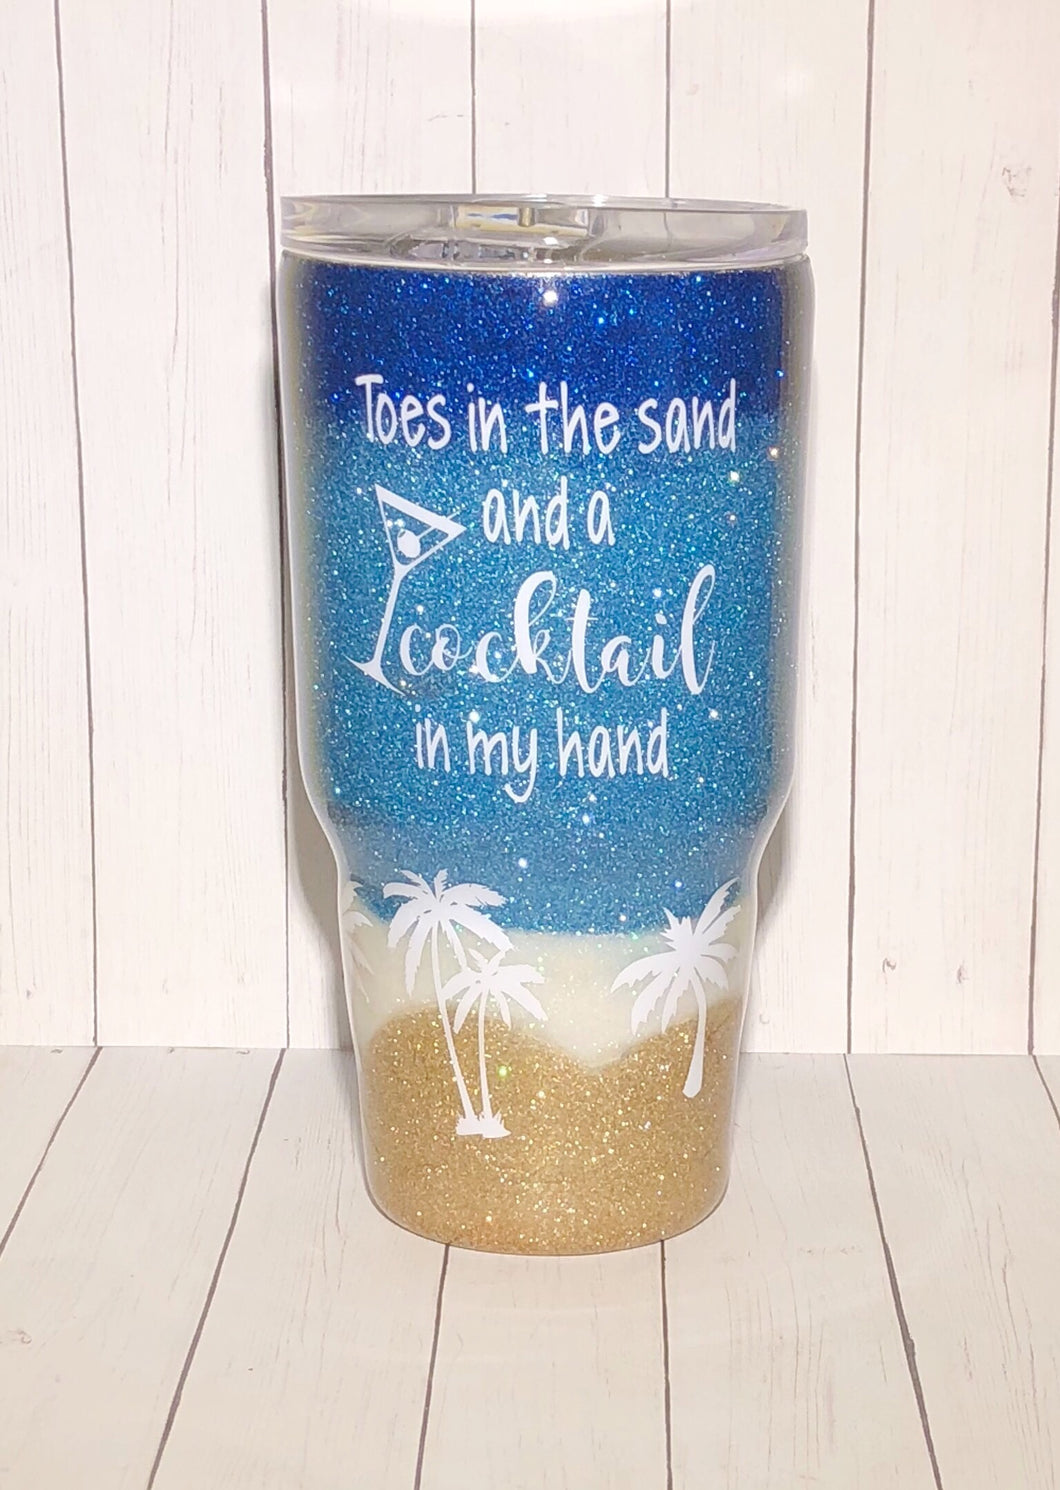 Toes in the sand beach tumbler